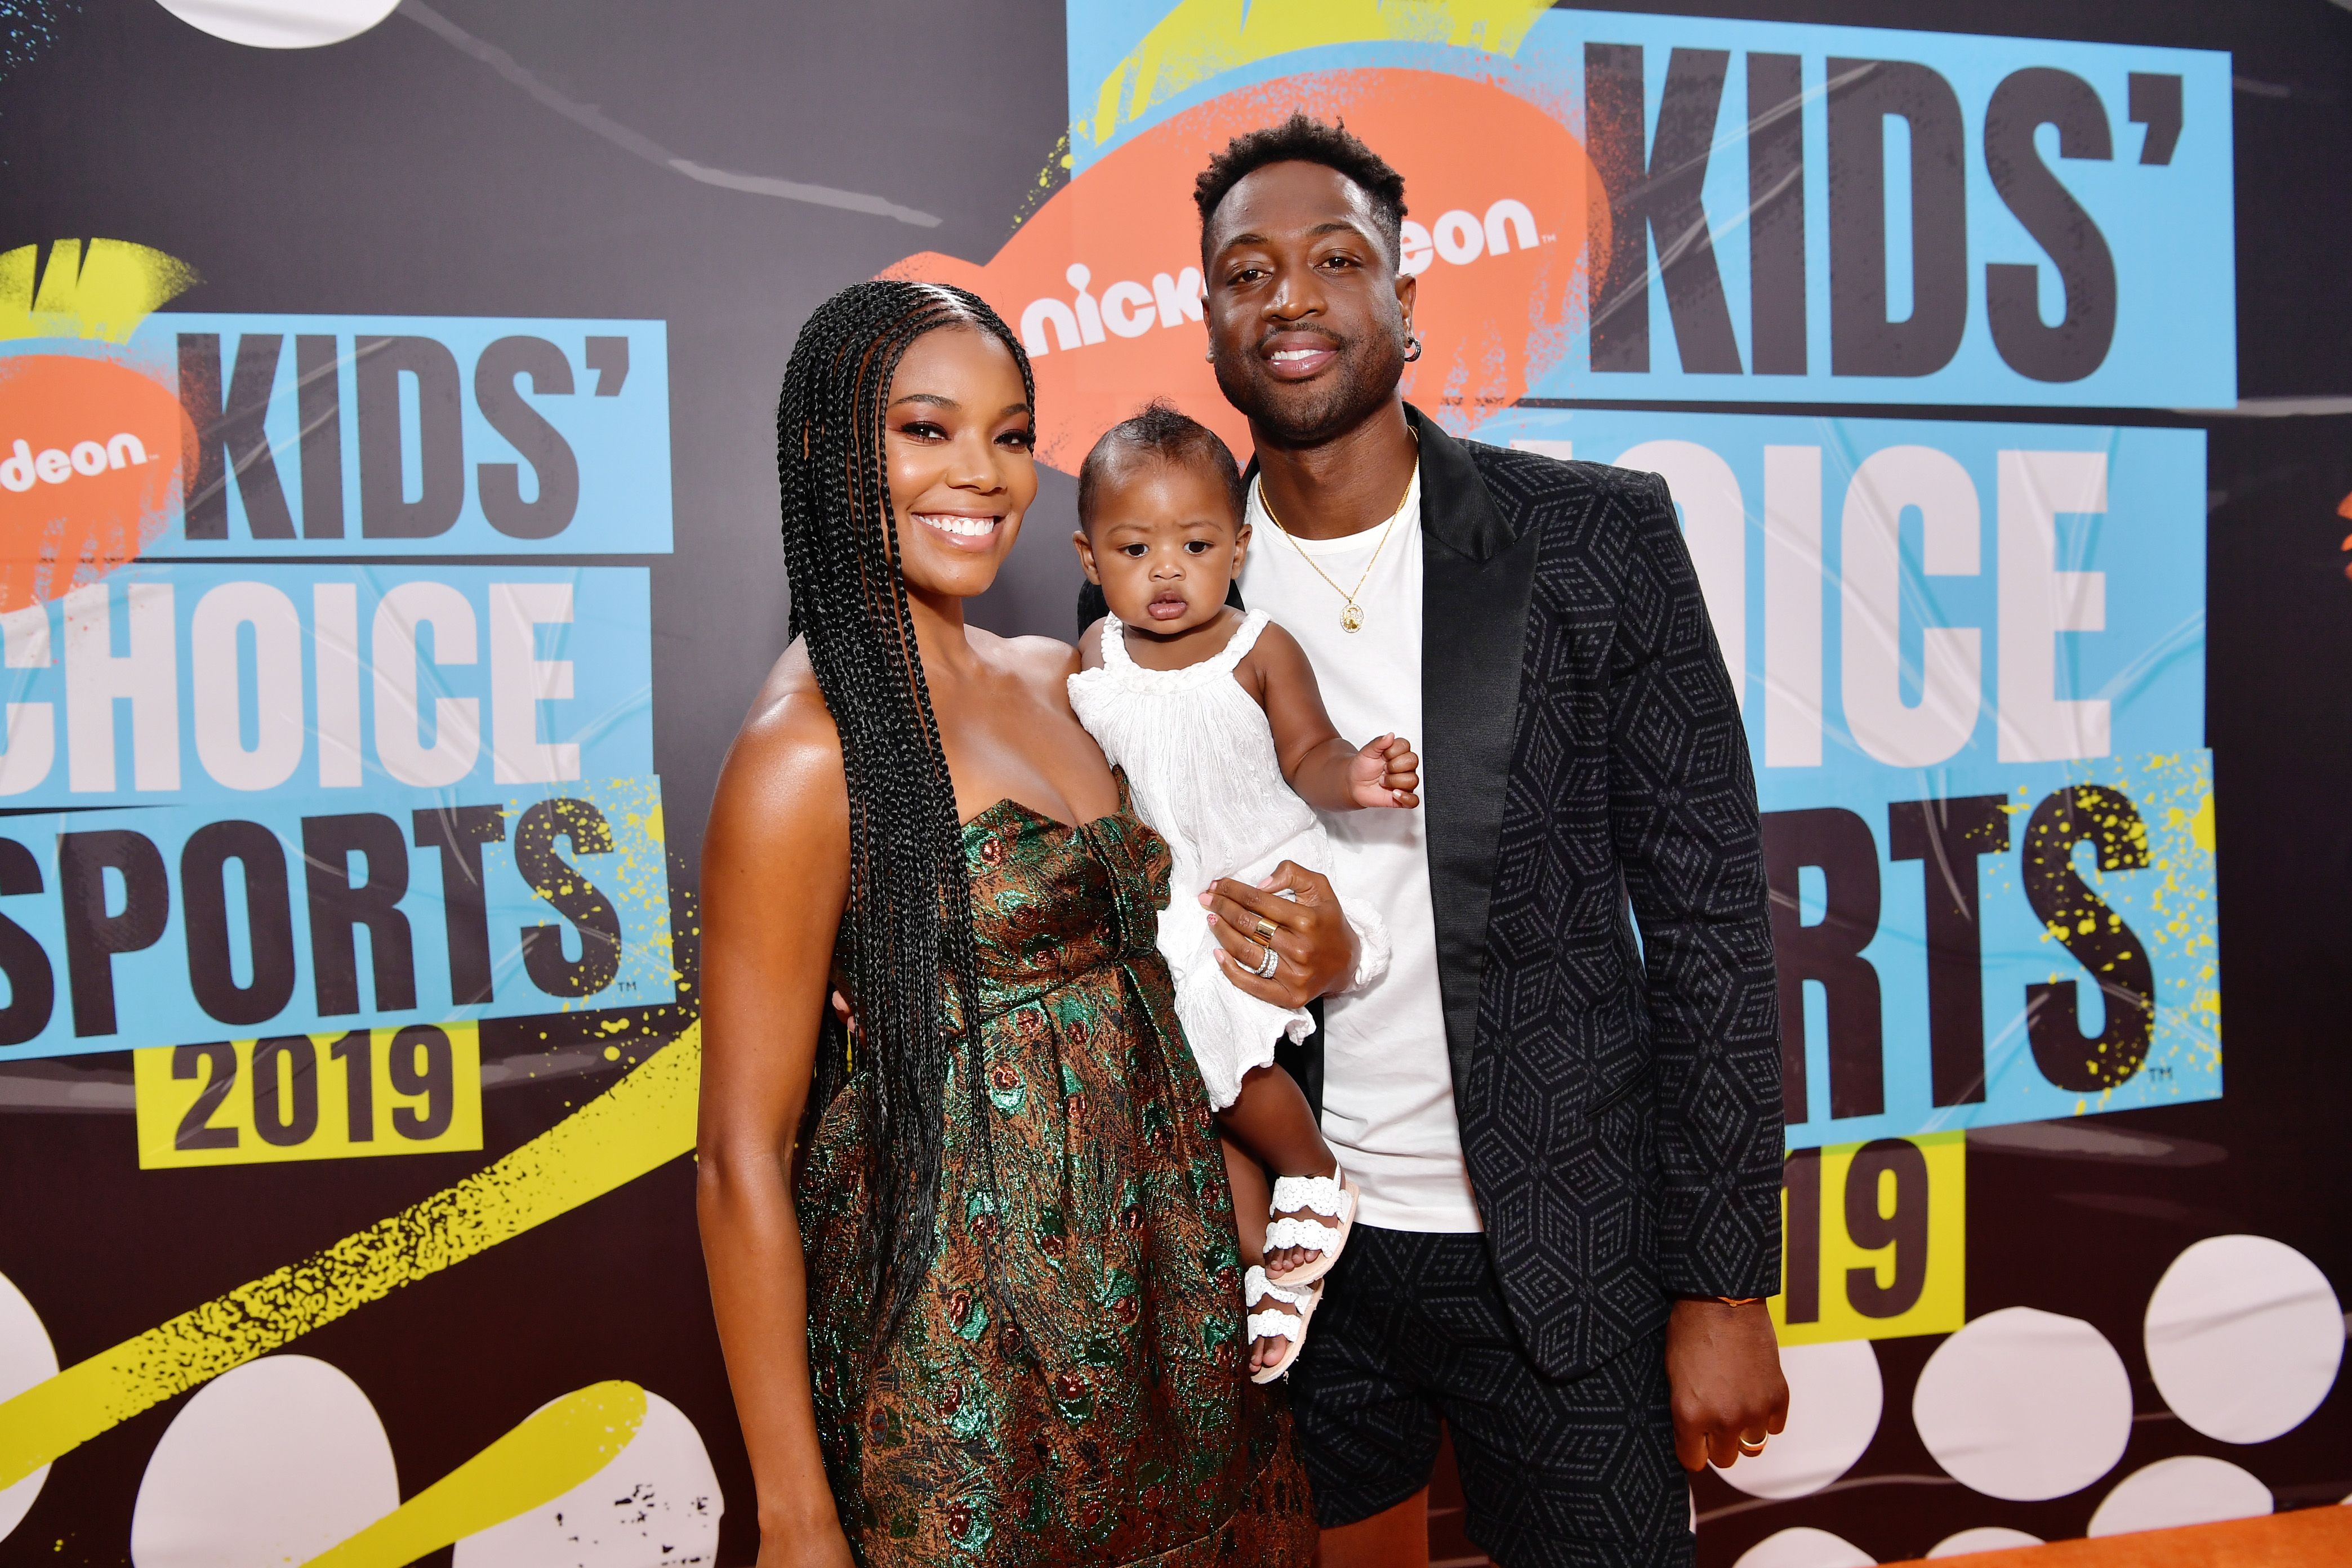 Gabrielle Union and Dwyane Wade at Nickelodeon Kids' Choice Sports 2019 at Barker Hangar on July 11, 2019. | Photo: Getty Images